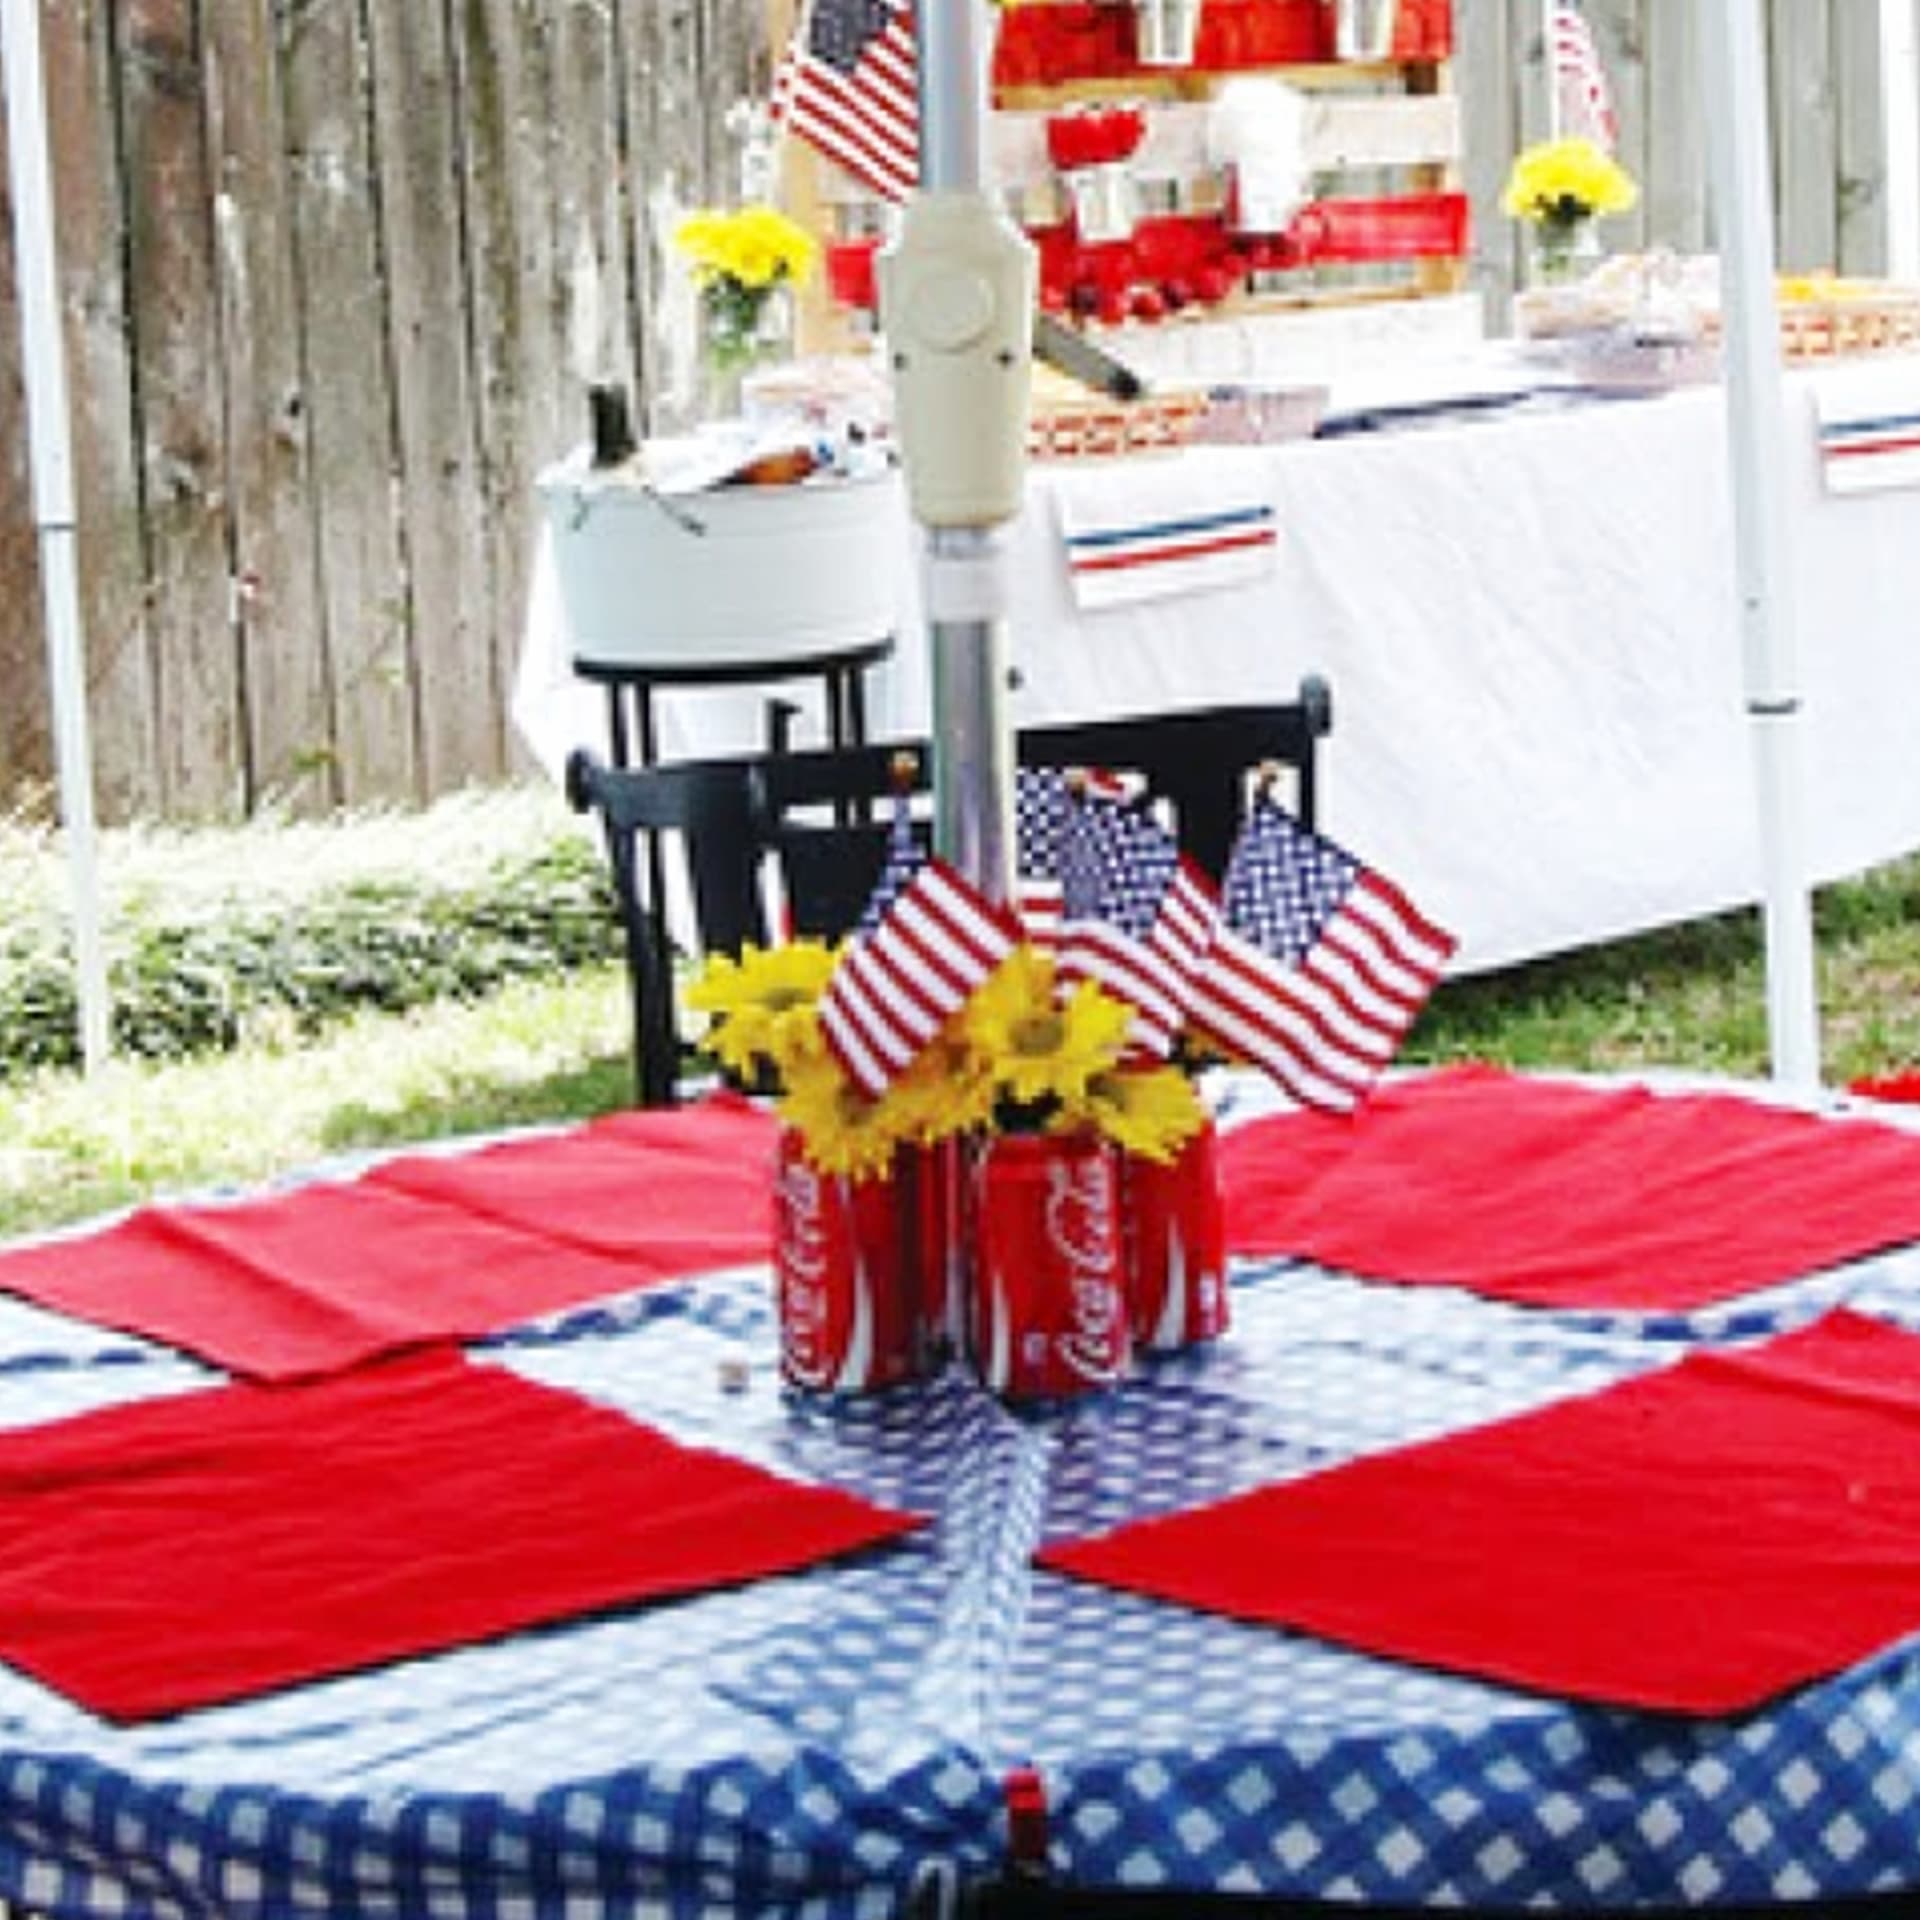 4th of July party ideas - table decorating ideas for a 4th of July party, cookout or block party